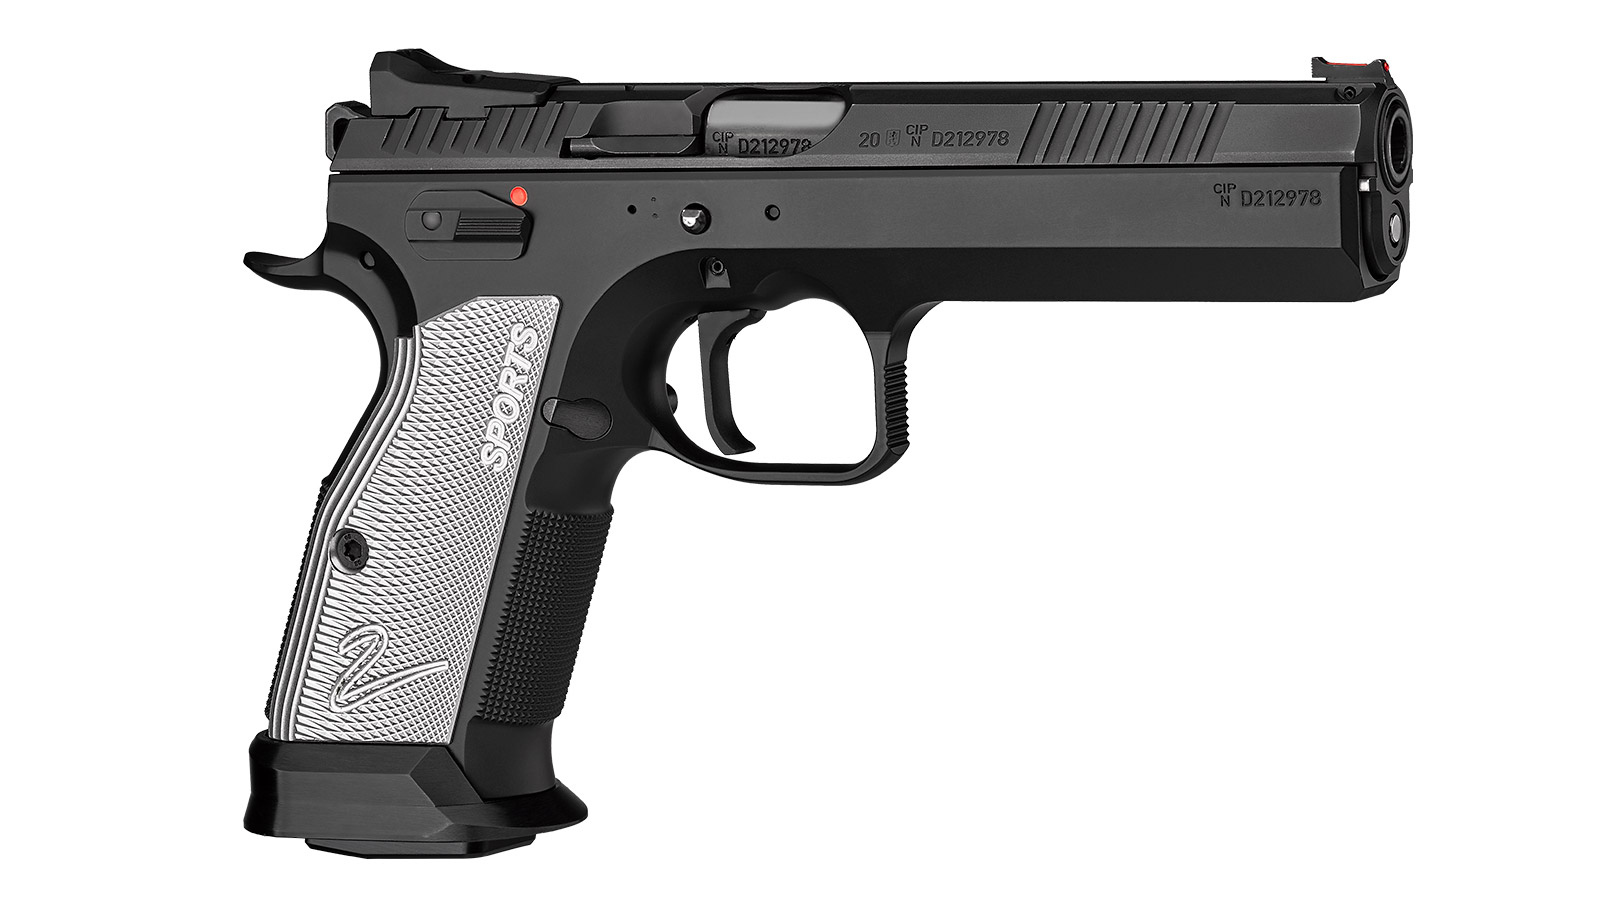 CZ 75 TS2 Entry Model  9mm Luger